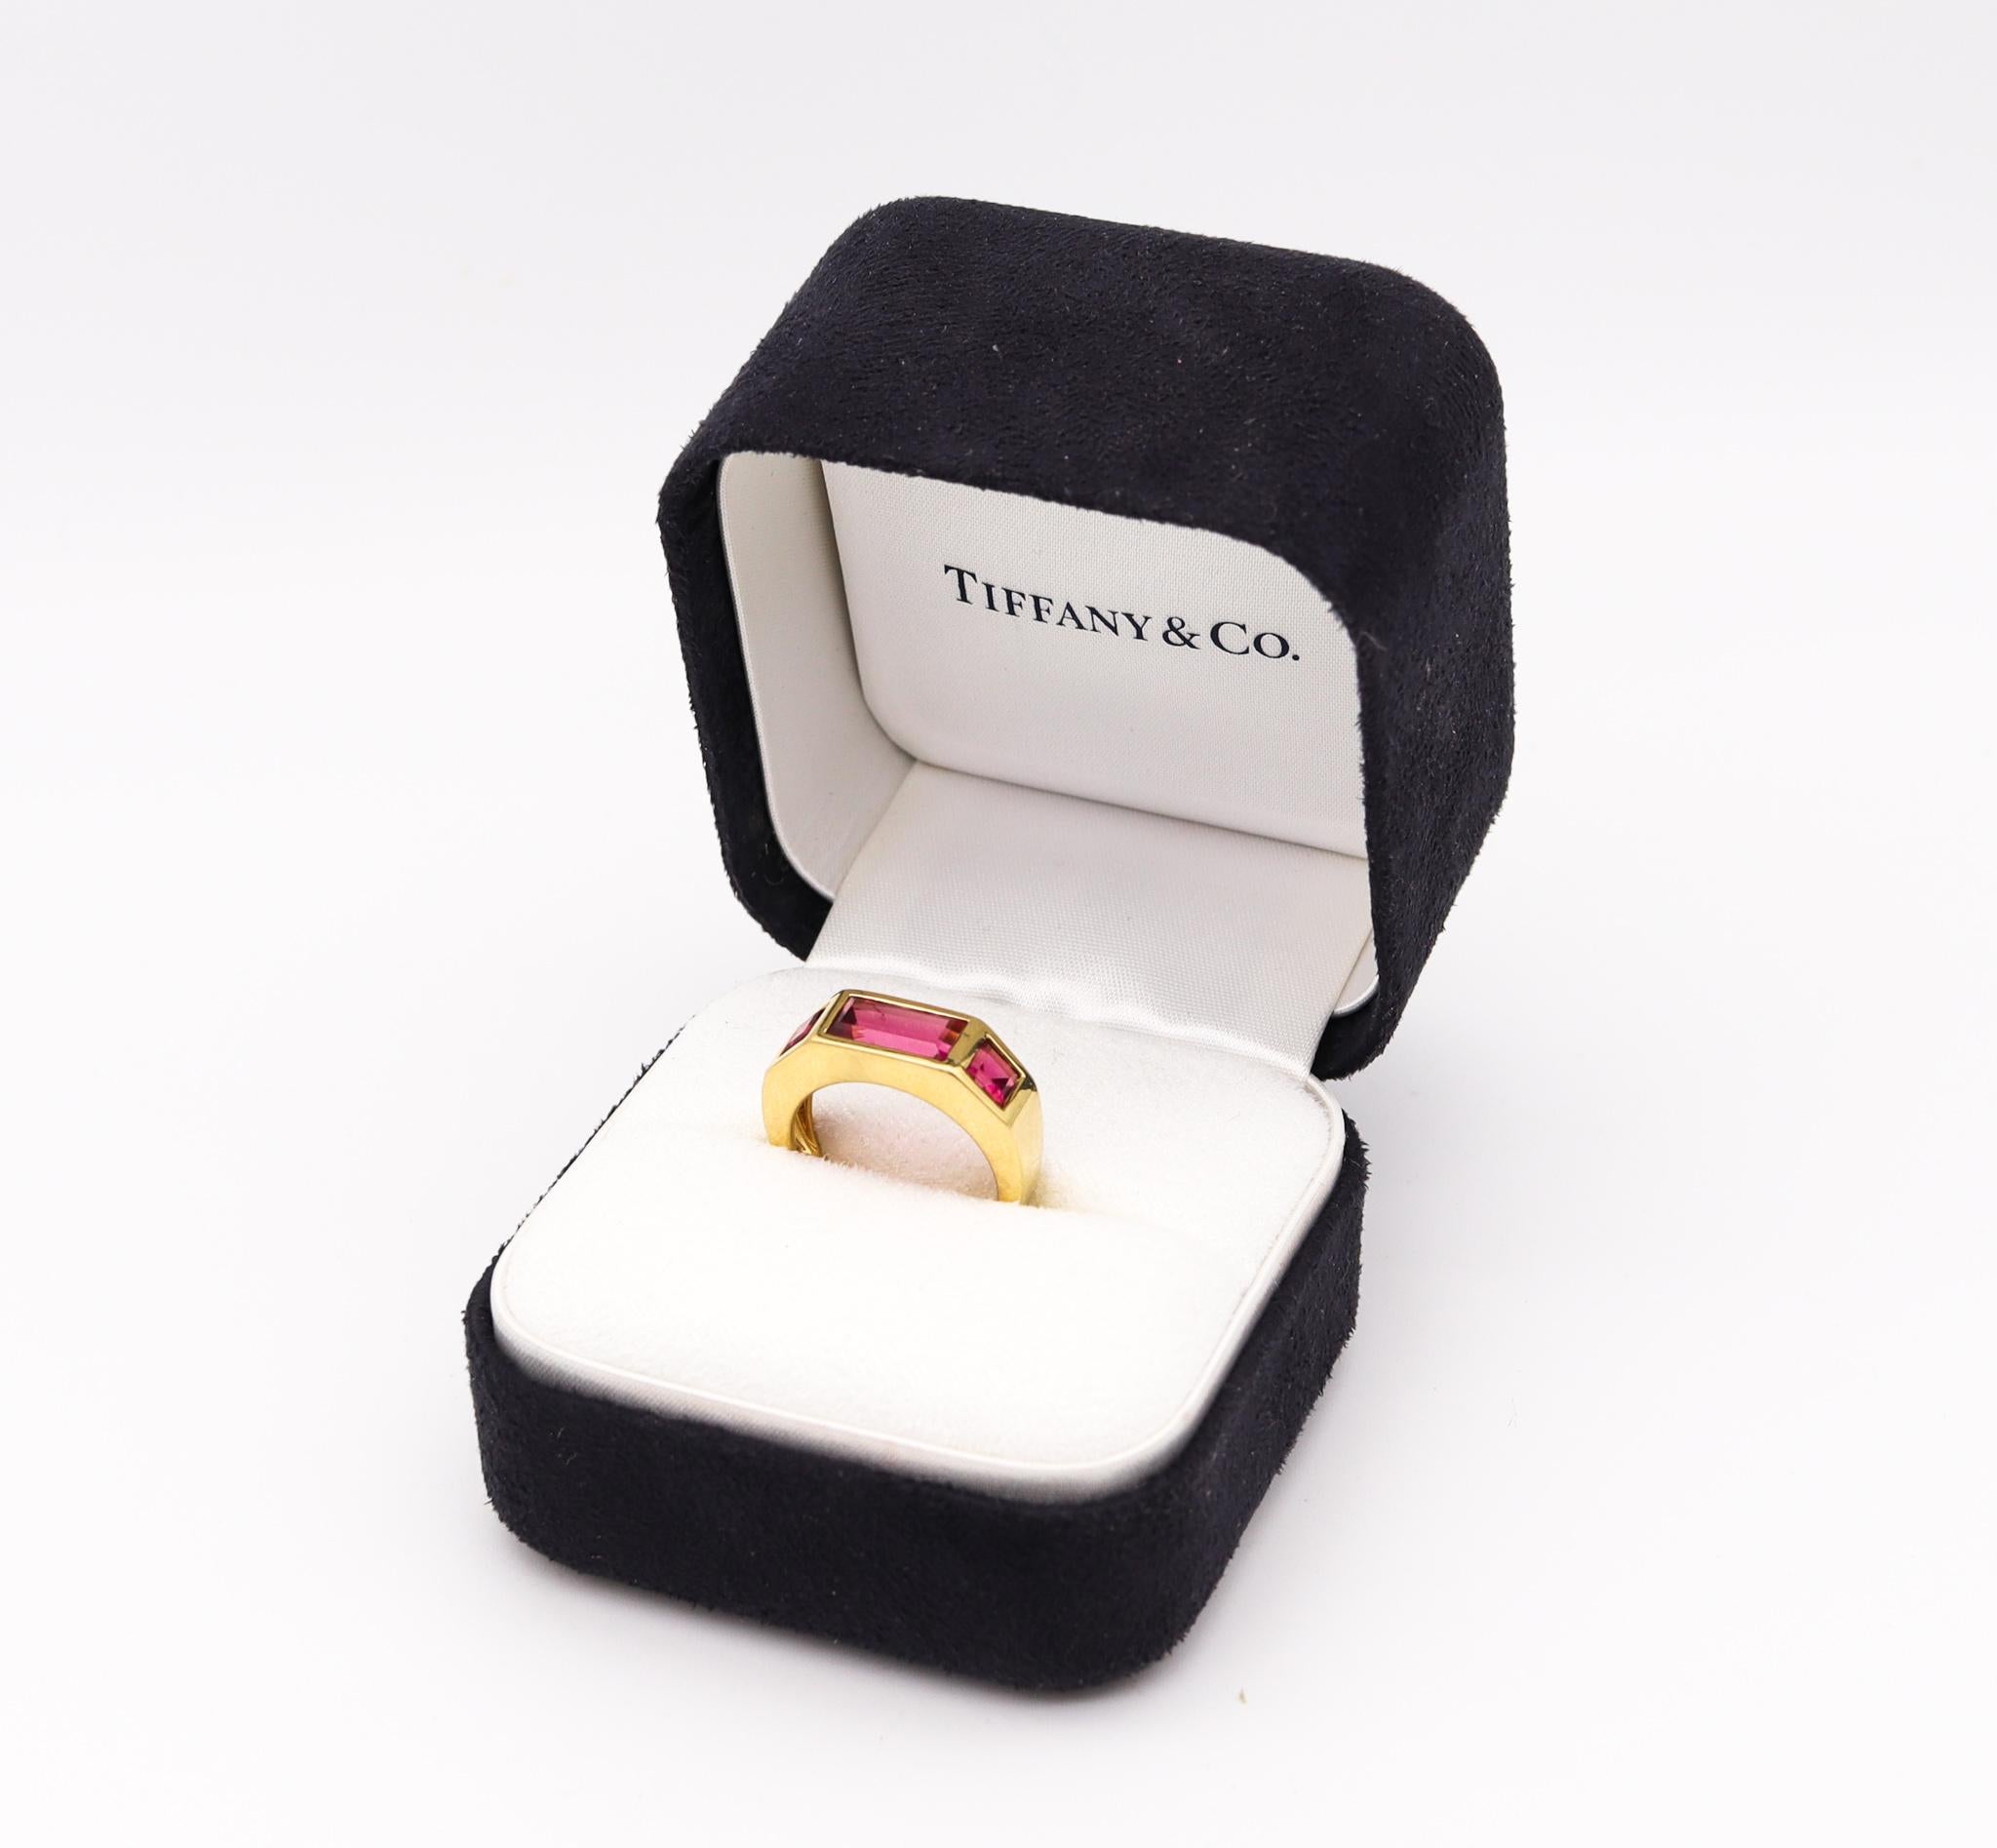 Modernist Tiffany & Co Paloma Picasso Studio Geometric Ring 18Kt Gold 4.34 Cts Tourmalines